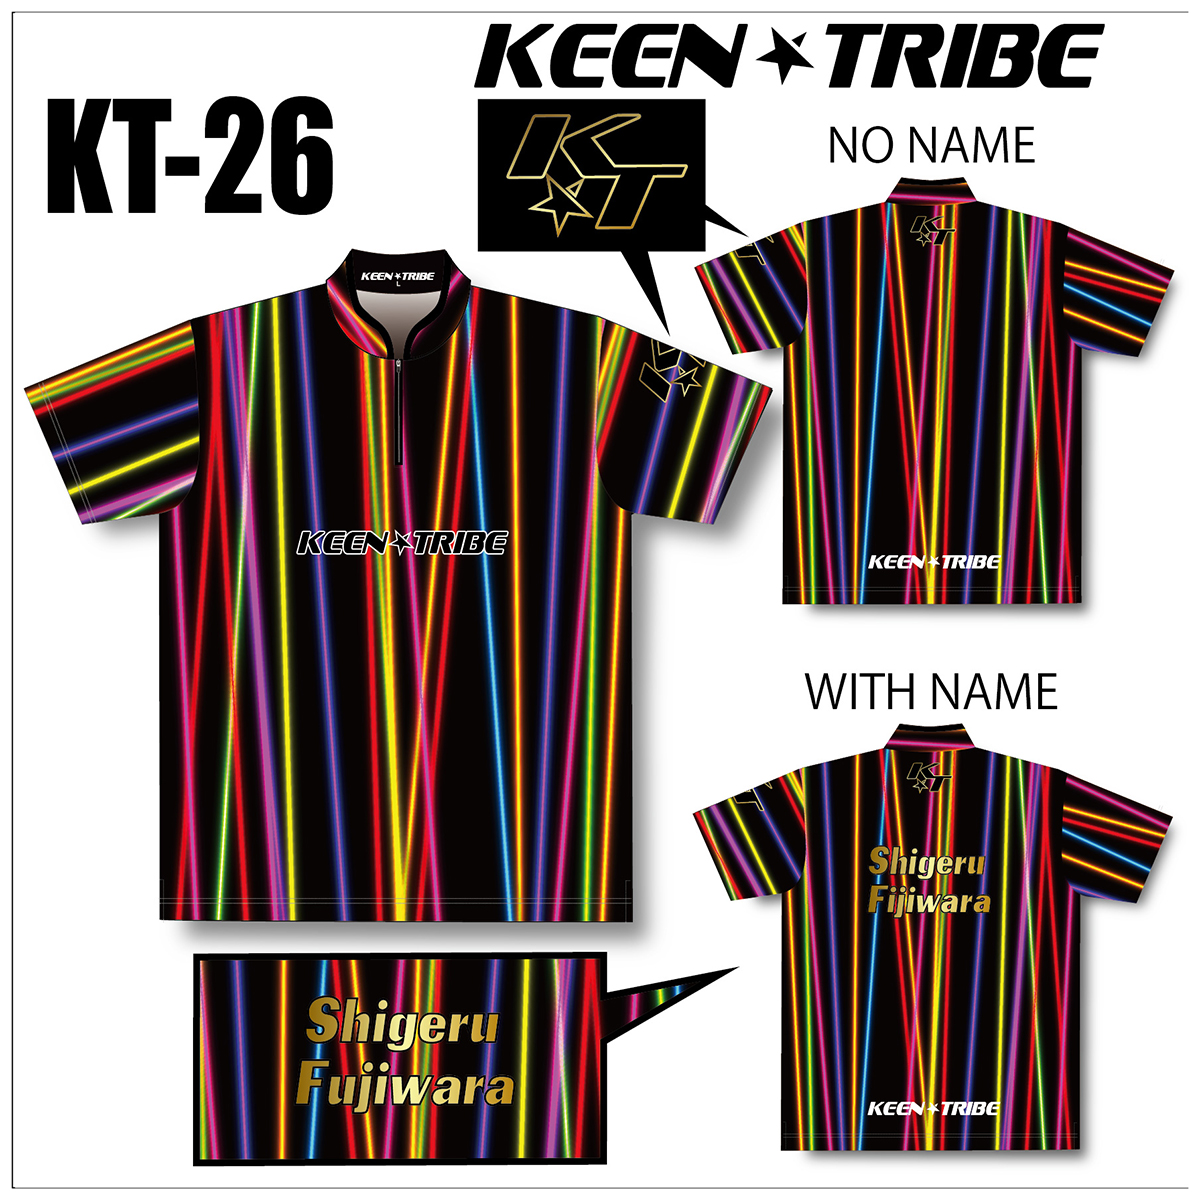 KEEN ★ TRIBE　KT-26(受注生産)